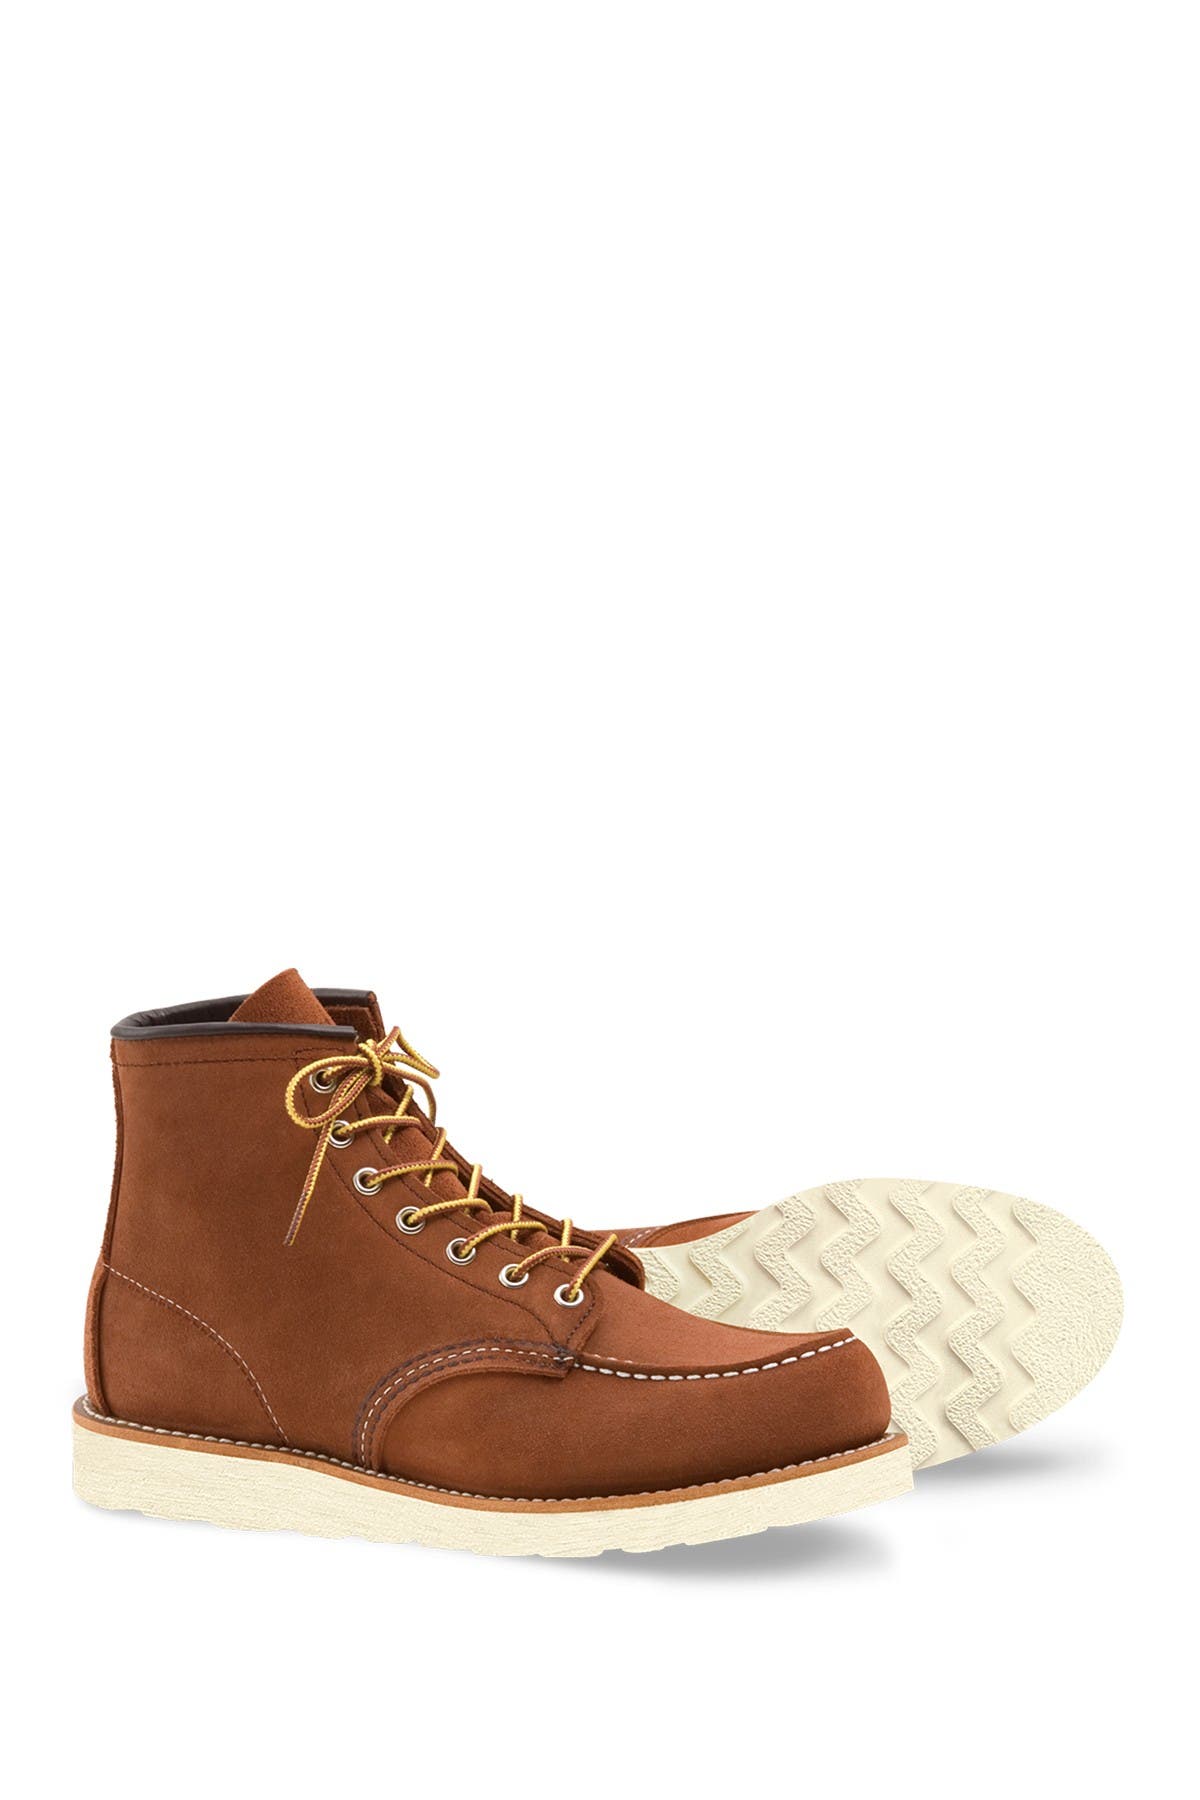 nordstrom red wing